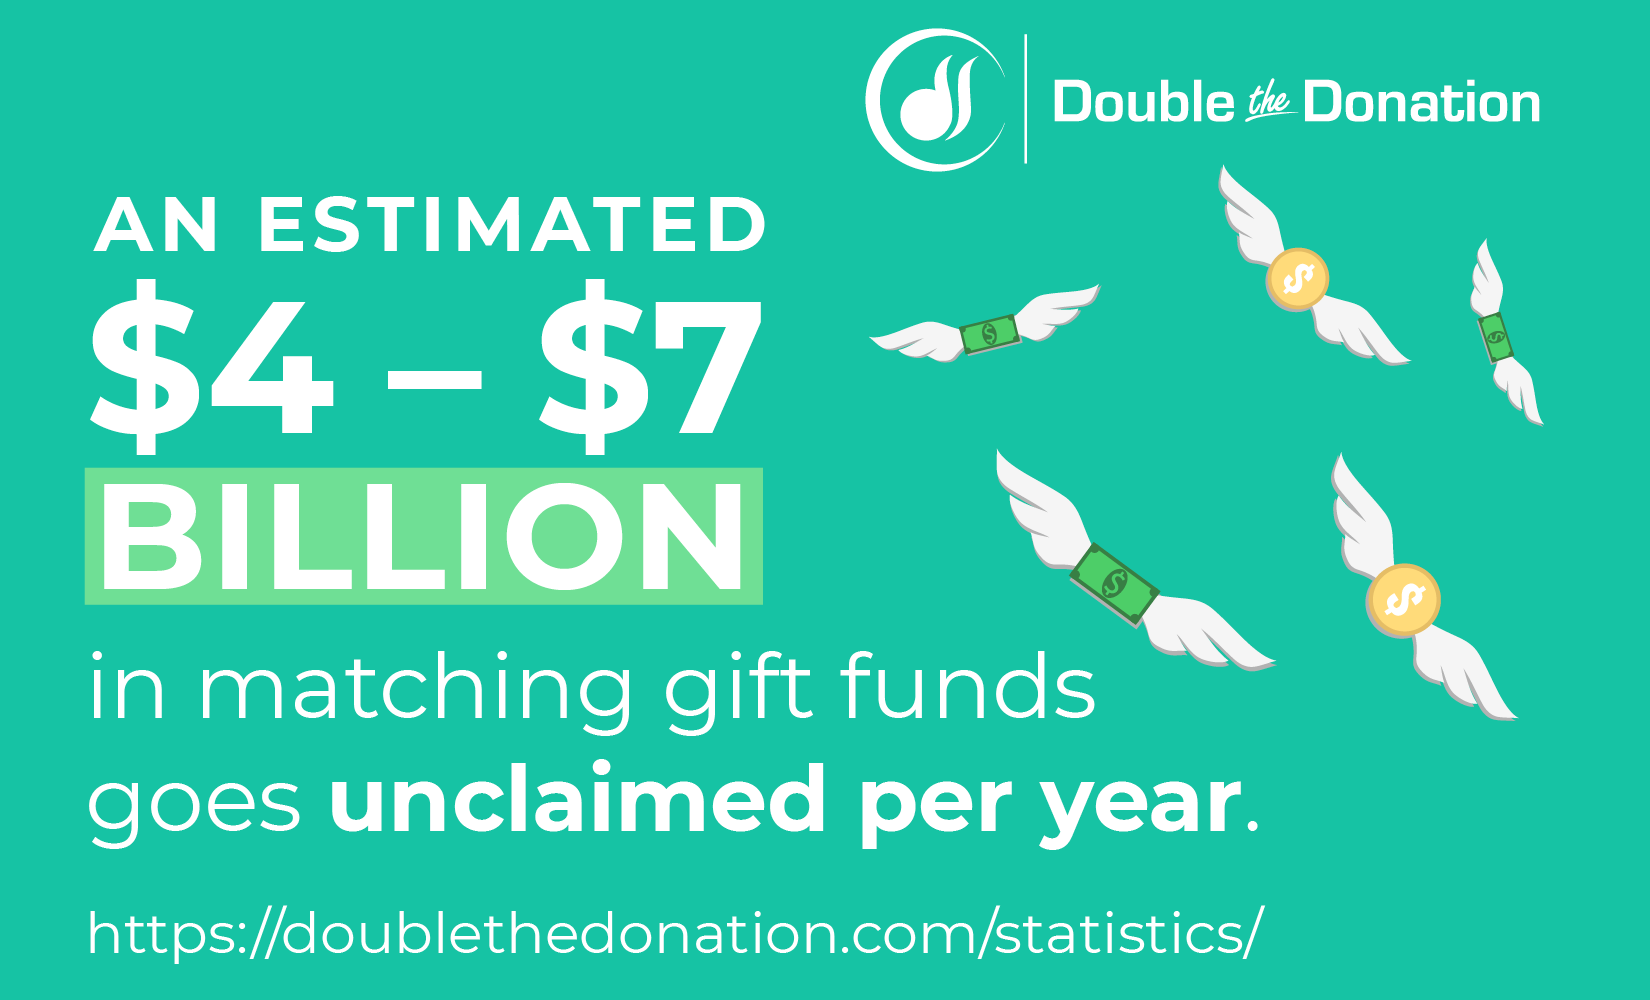 These statistics demonstrate the impact that the lack of awareness of matching gift programs has on revenue.